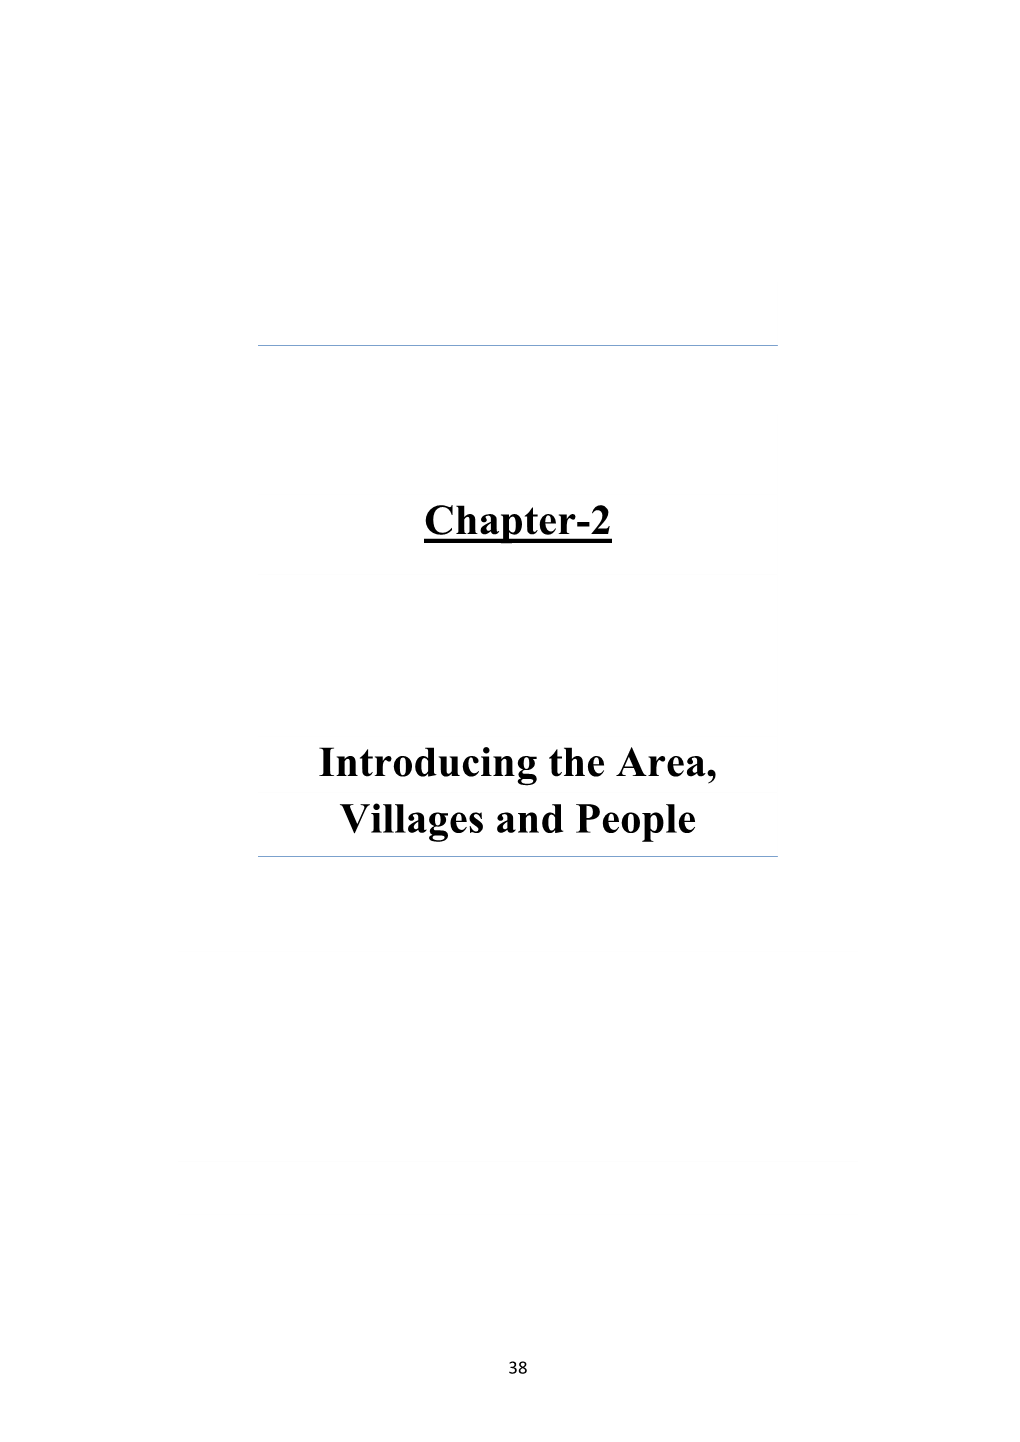 Chapter-2 Introducing the Area, Villages and People